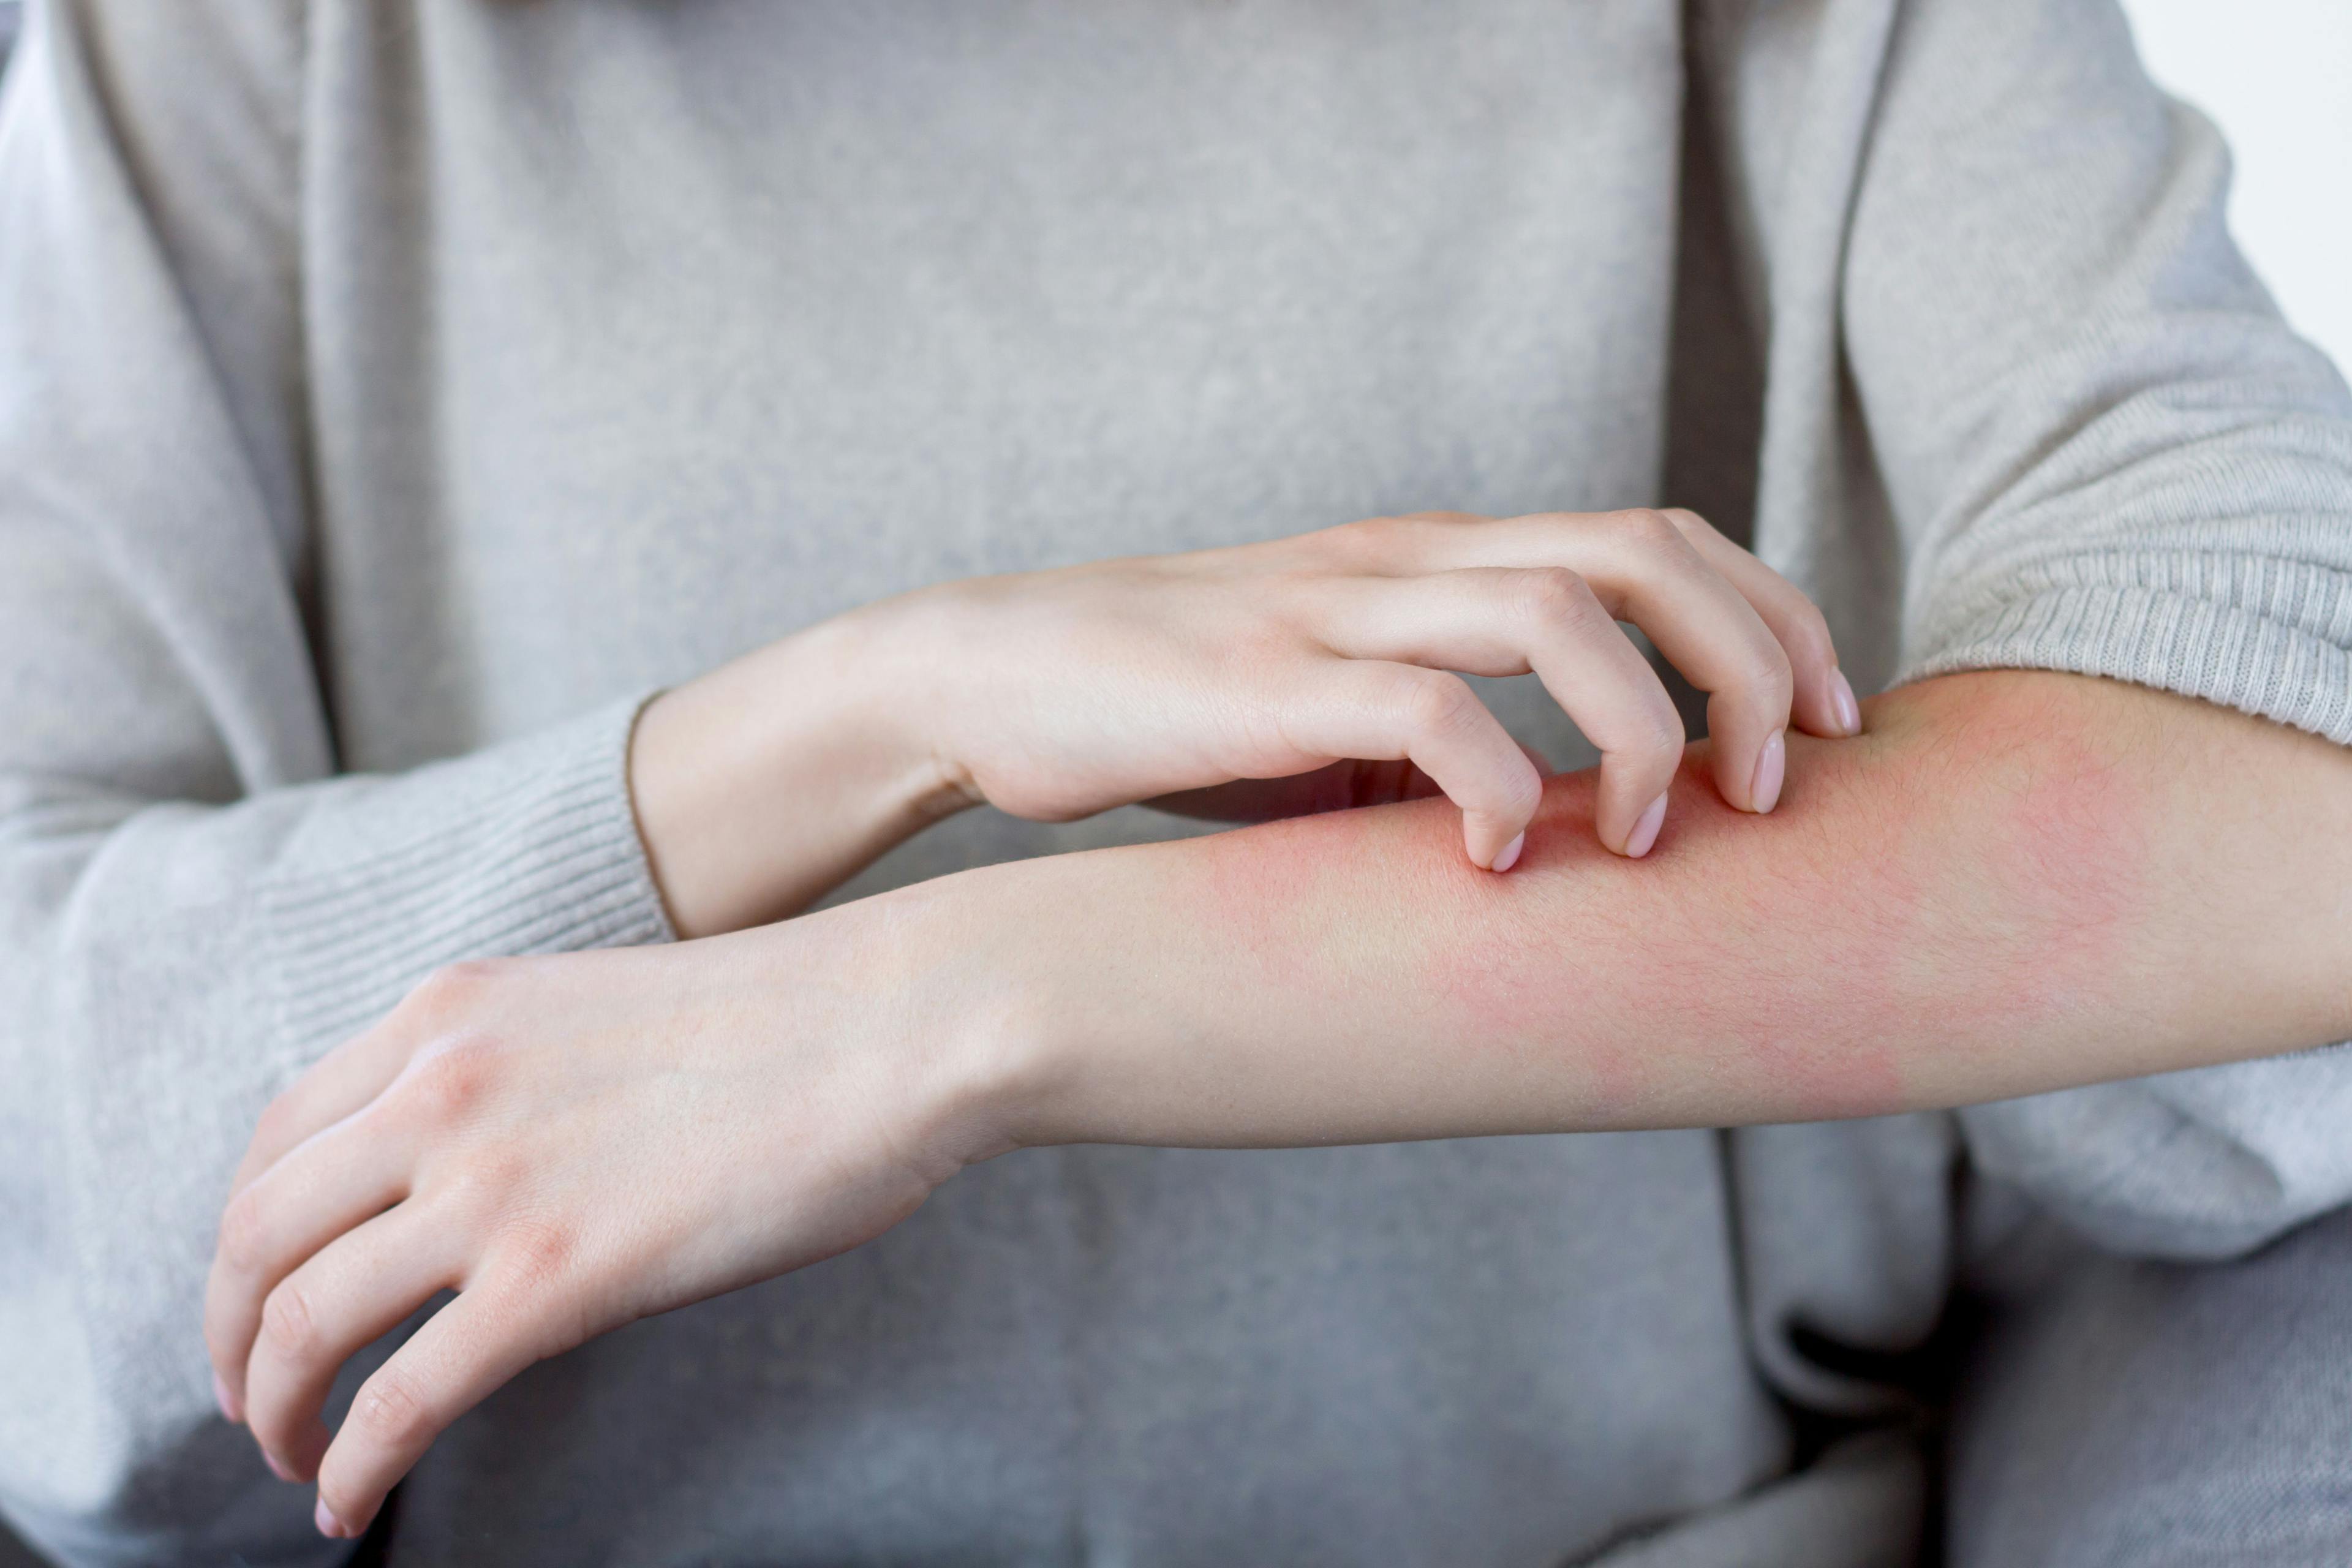 Closeup girl is scratching her hand with nails. Reddened, inflamed body parts causes discomfort and itching | Image credit: Monstar Studio - stock.adobe.com